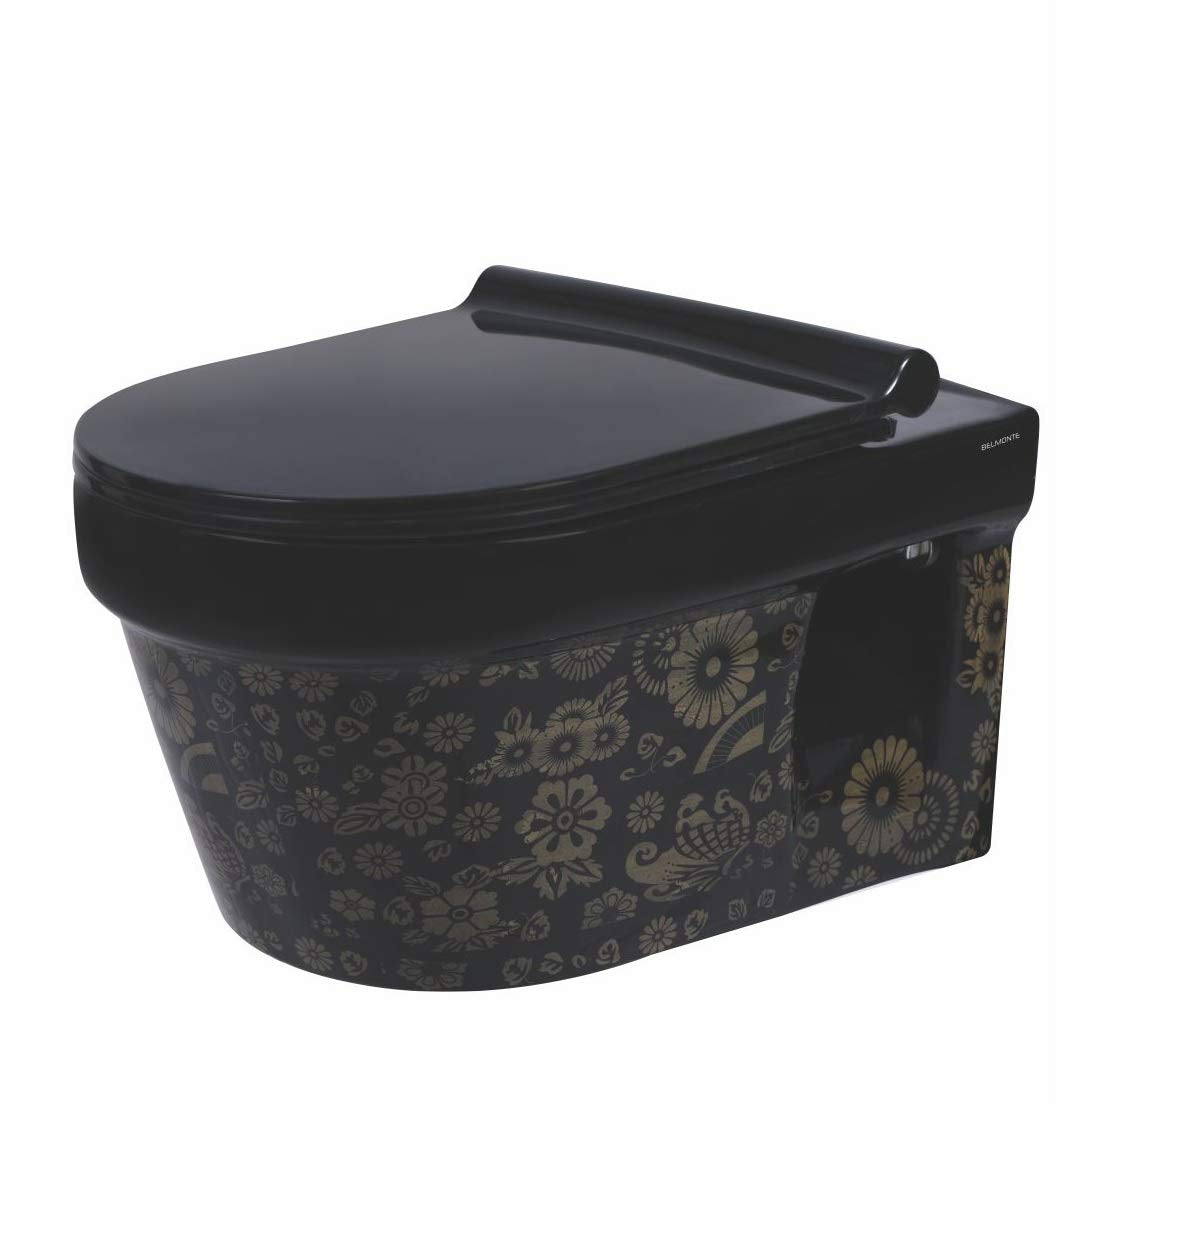 B Backline Ceramic Wall Mount Wall Hung Western Toilet Rimless Commode 20 X 14 X 13 Inches Printed Black